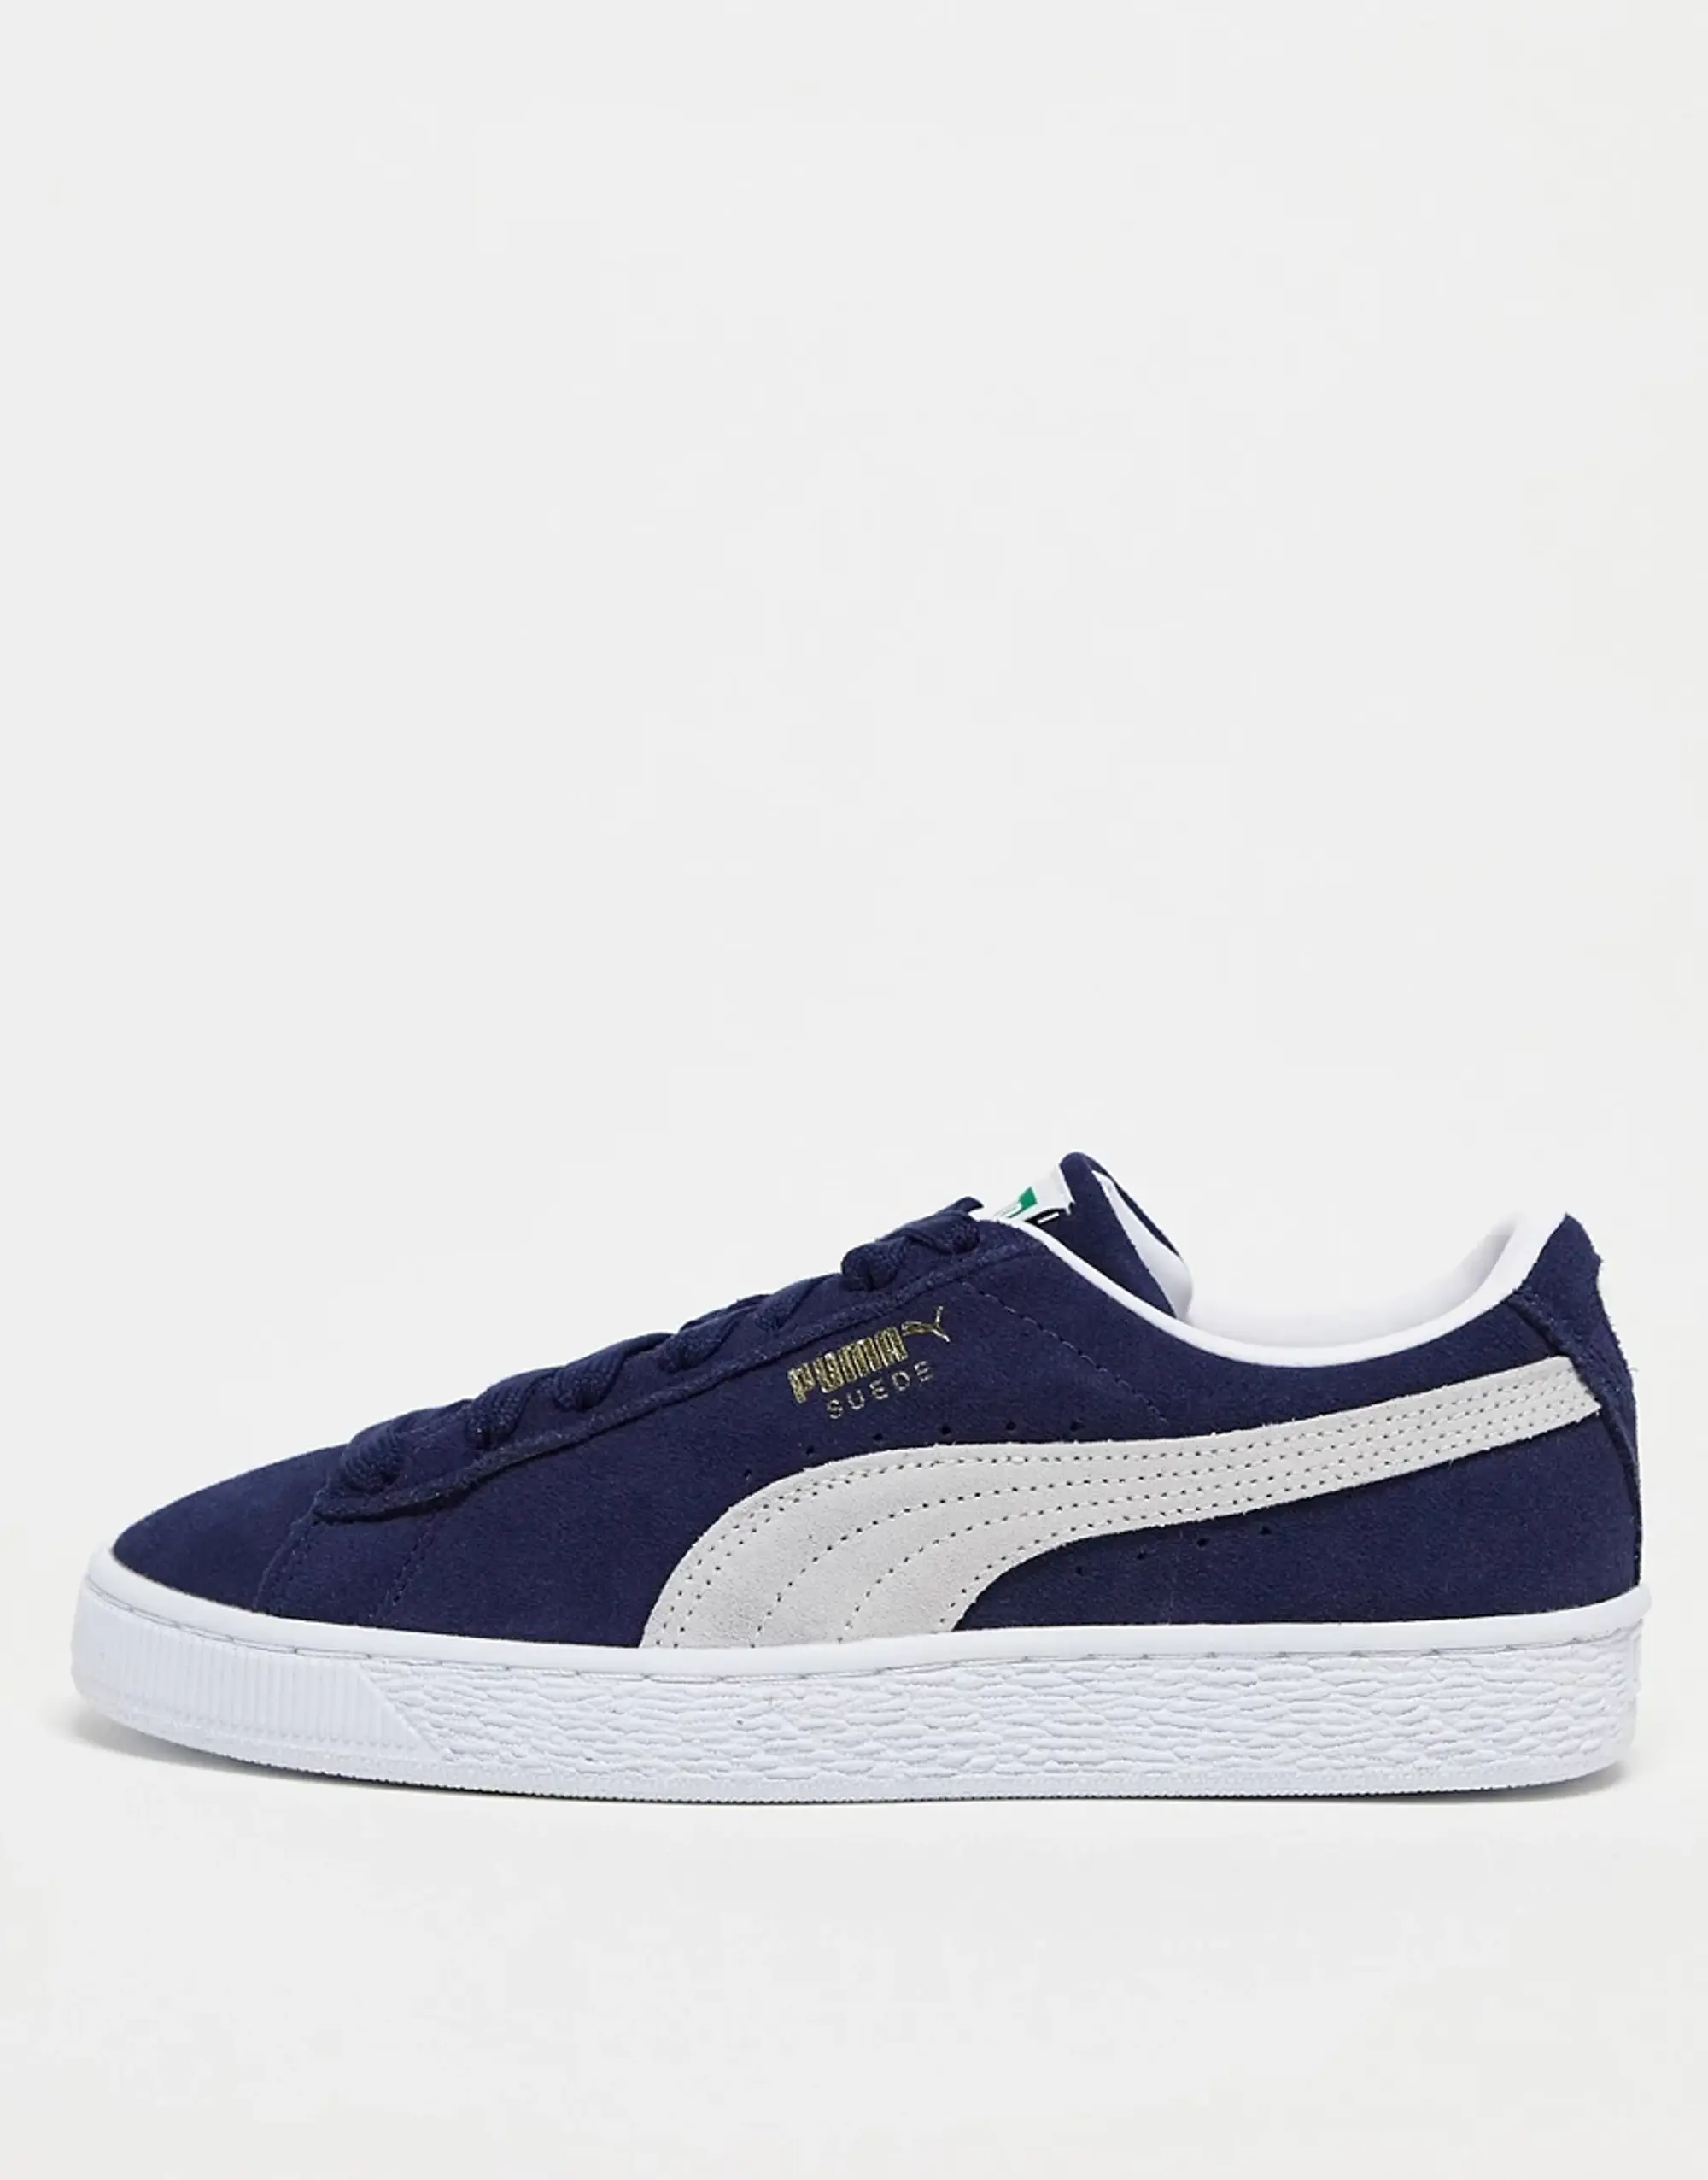 Puma Suede Classic Xxi Trainers In Blue And White